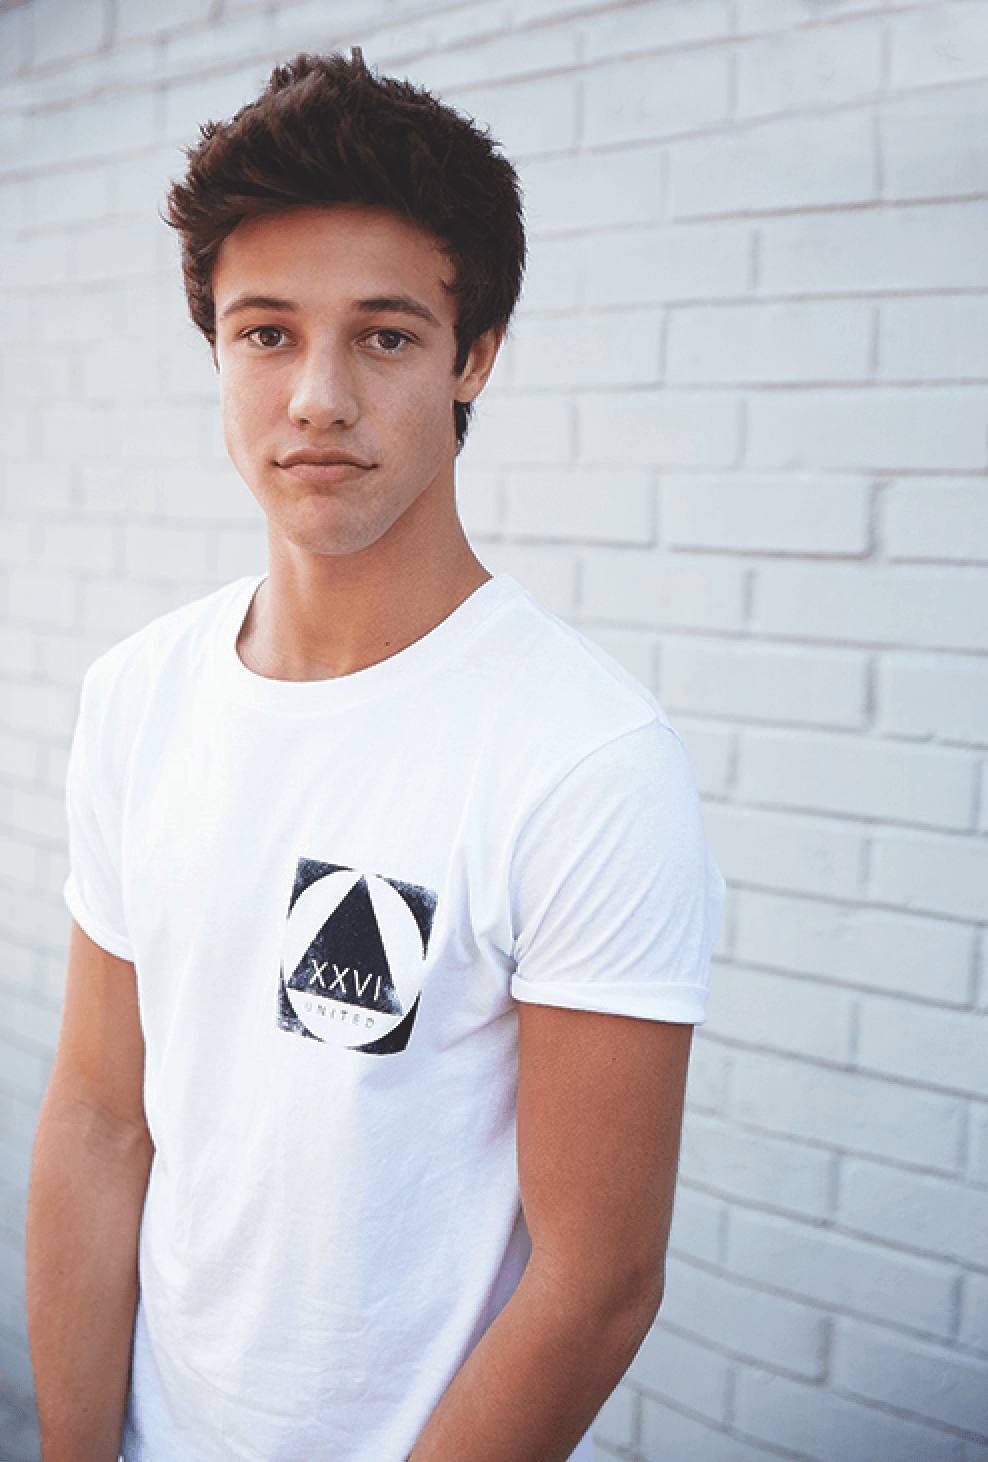 Best image about cameron dallas. Happy new year